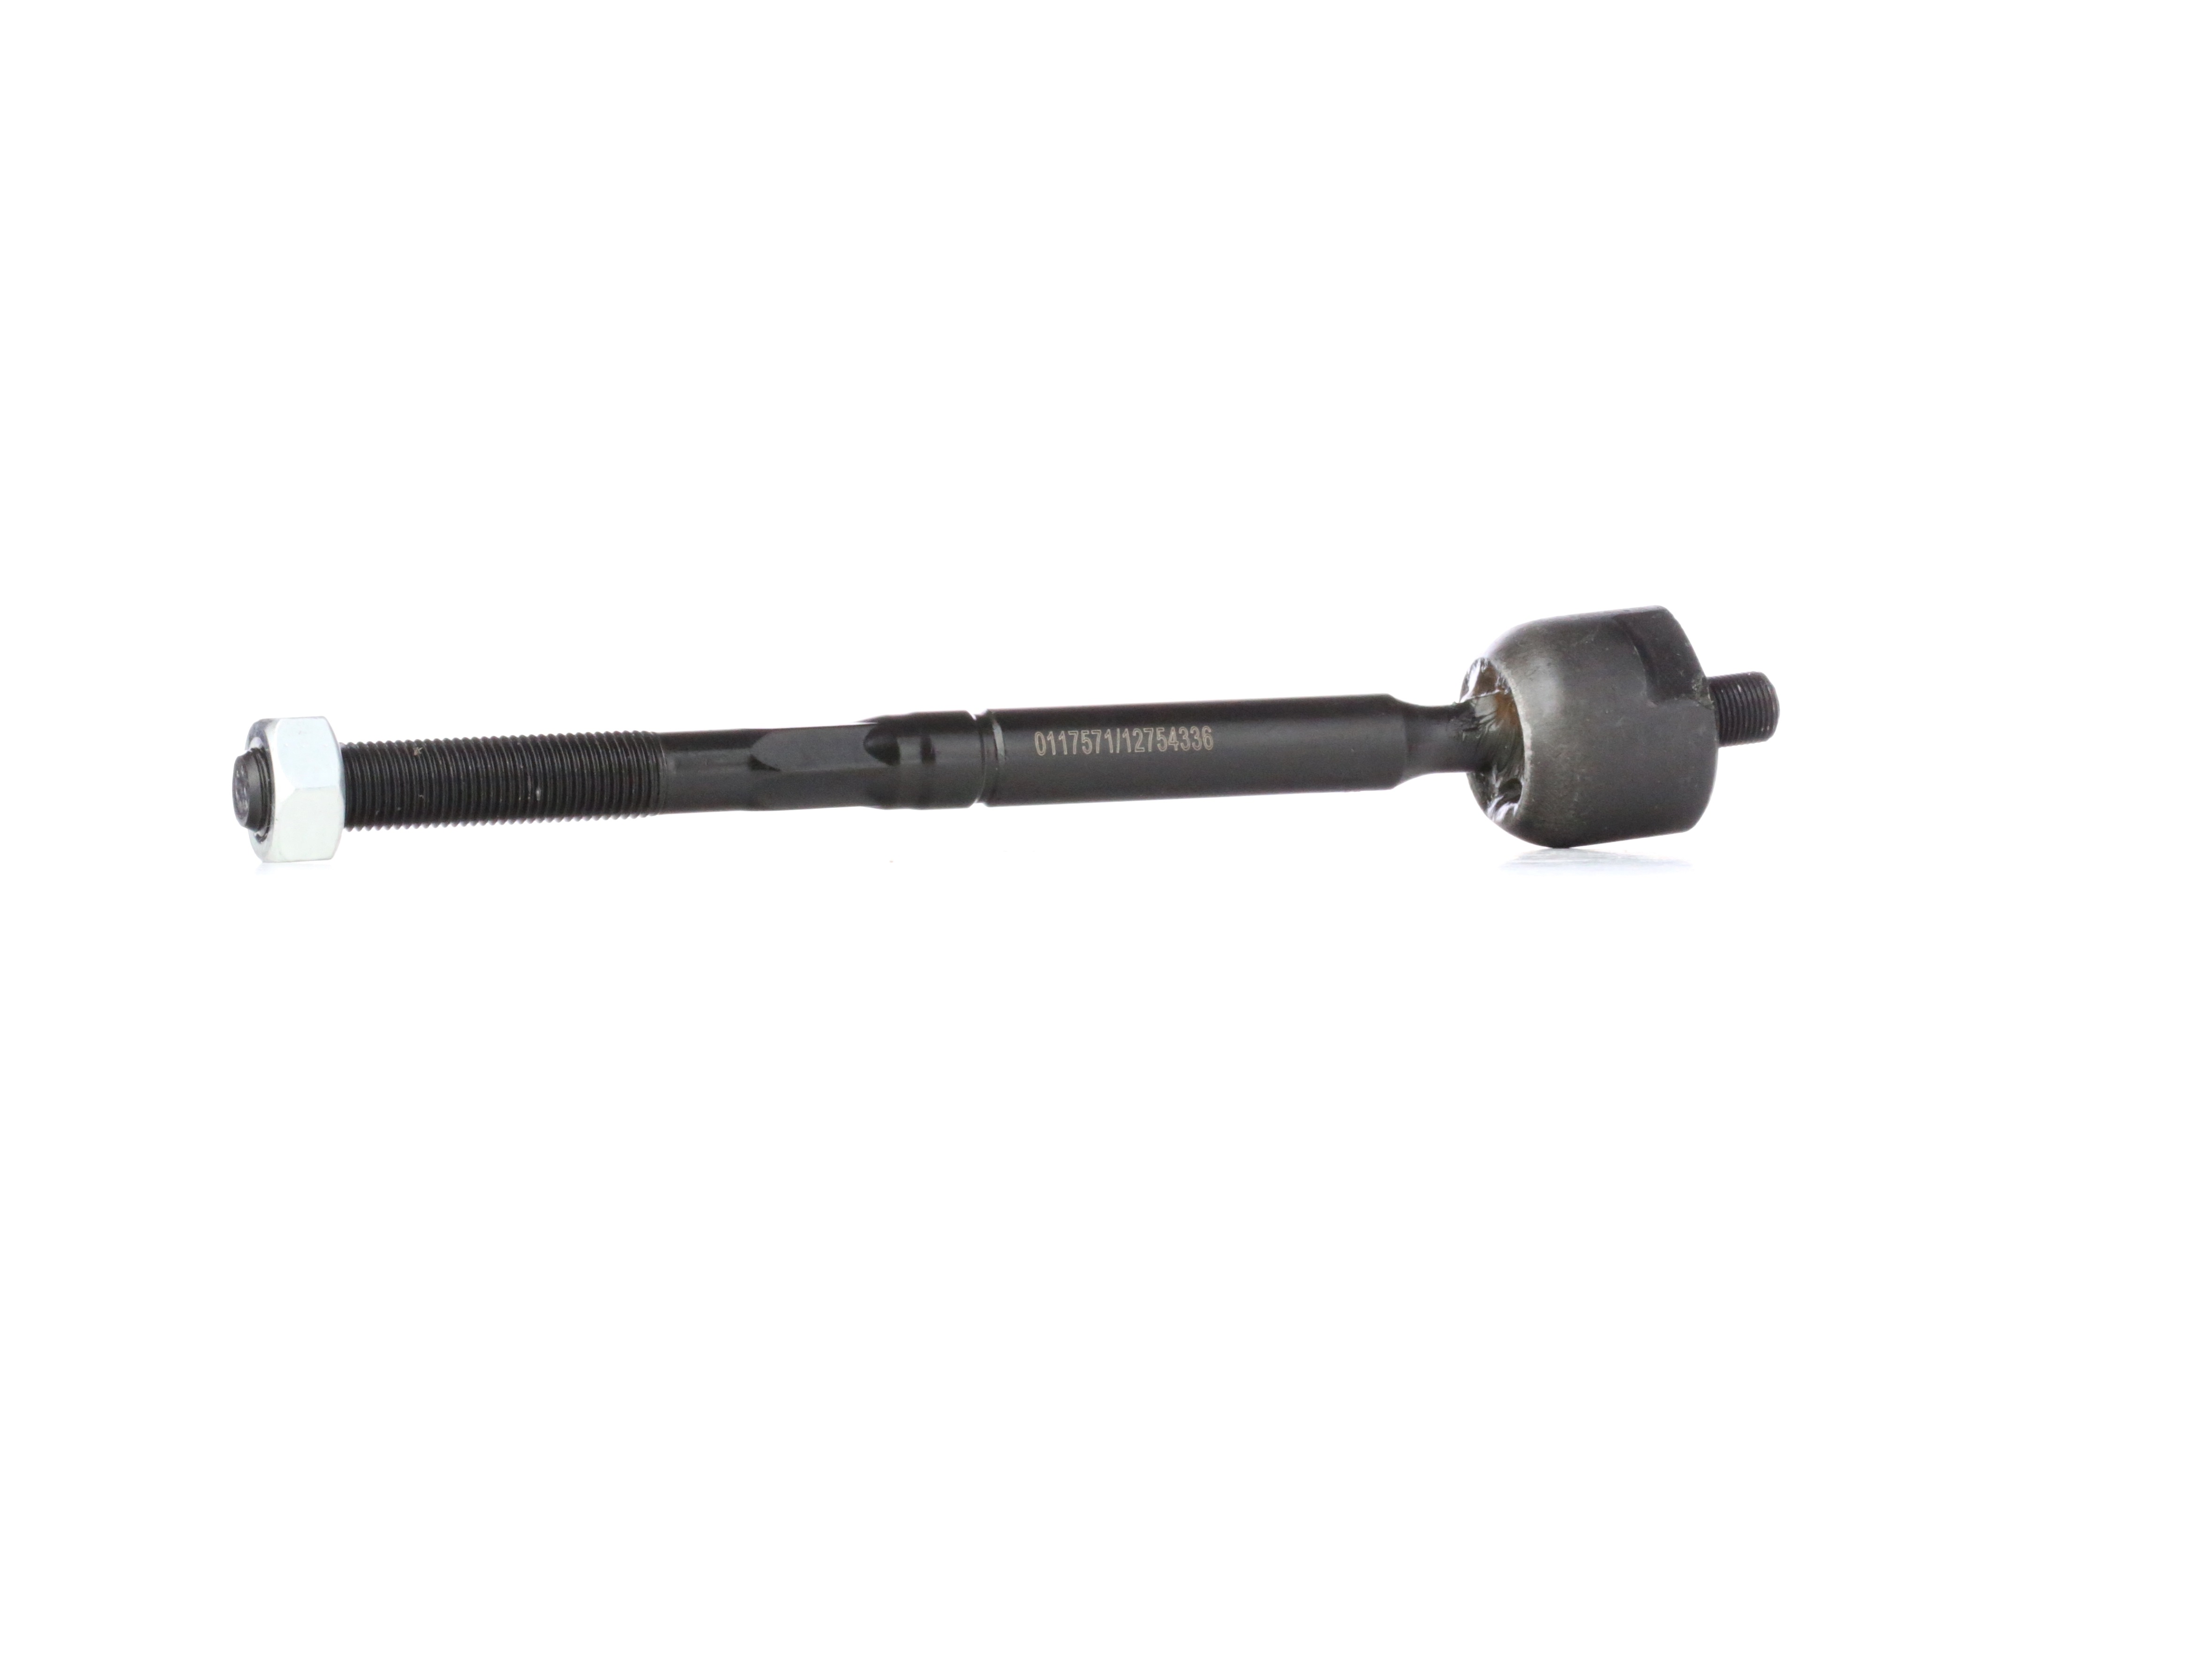 STARK Front axle both sides, Front Axle, M12X1.0 RHT, 245 mm, 262 mm Length: 245mm Tie rod axle joint SKTR-0240257 buy